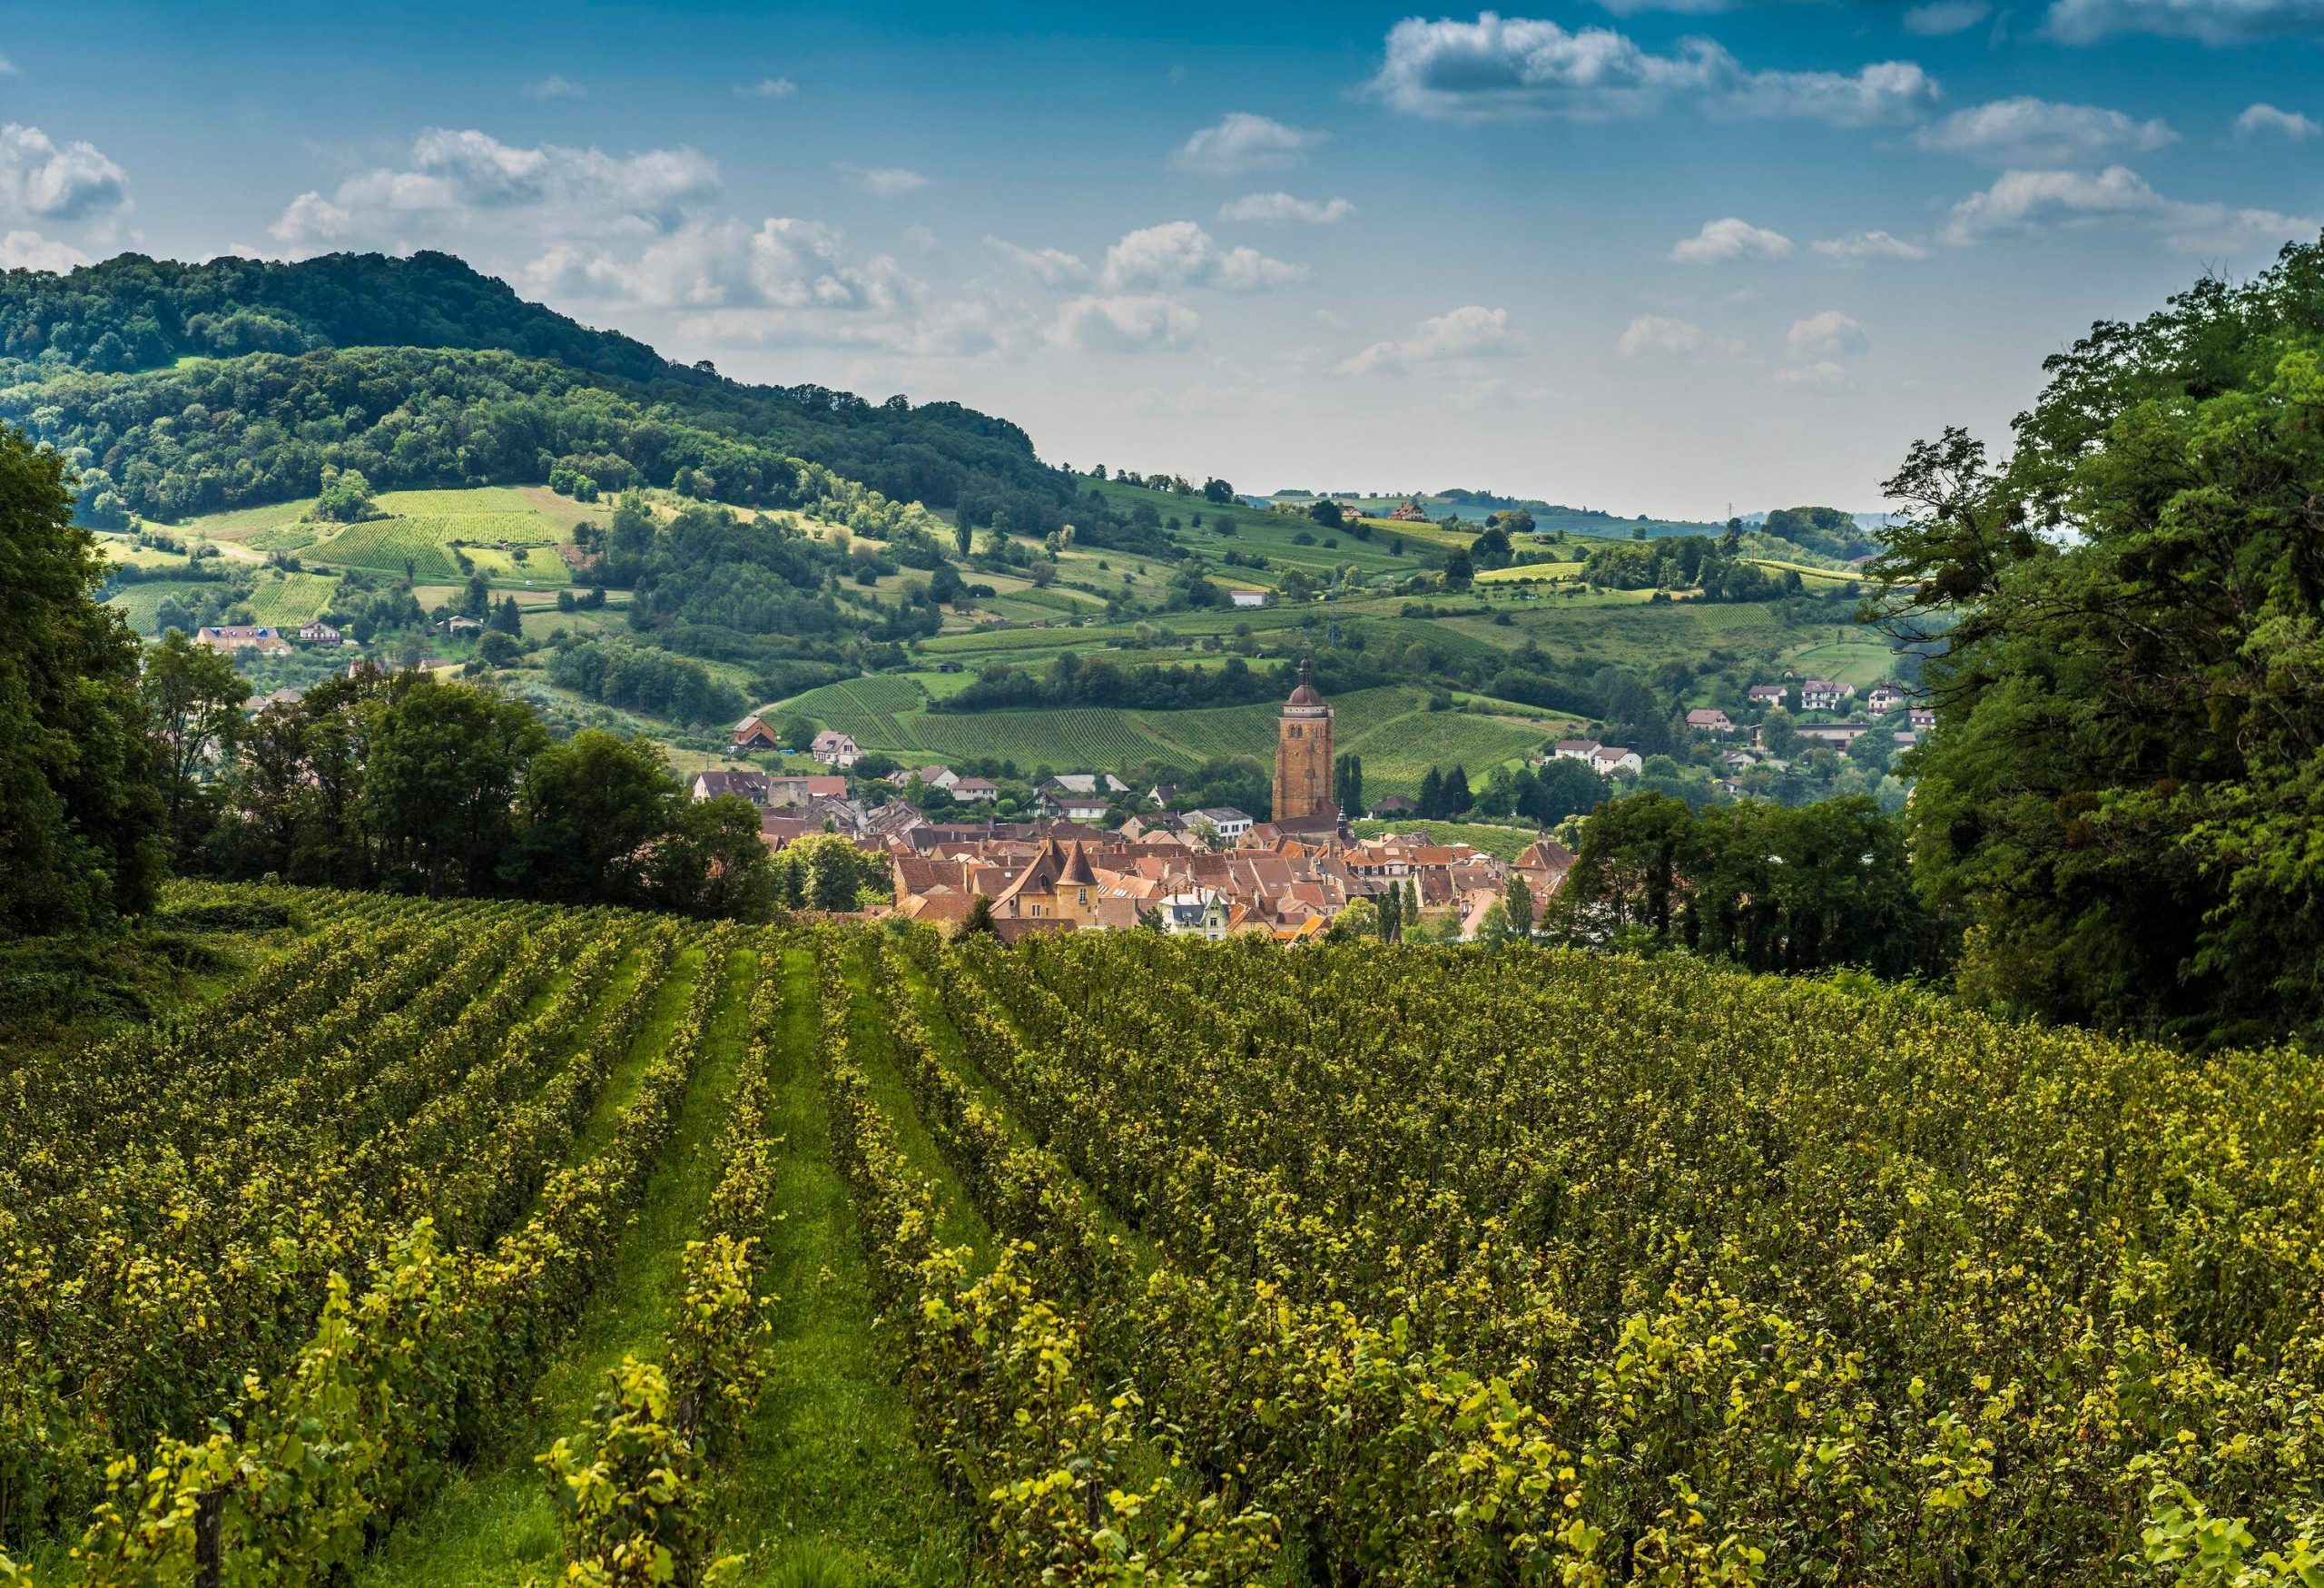 Eye level view of vineyard with an old village on a hill in the background